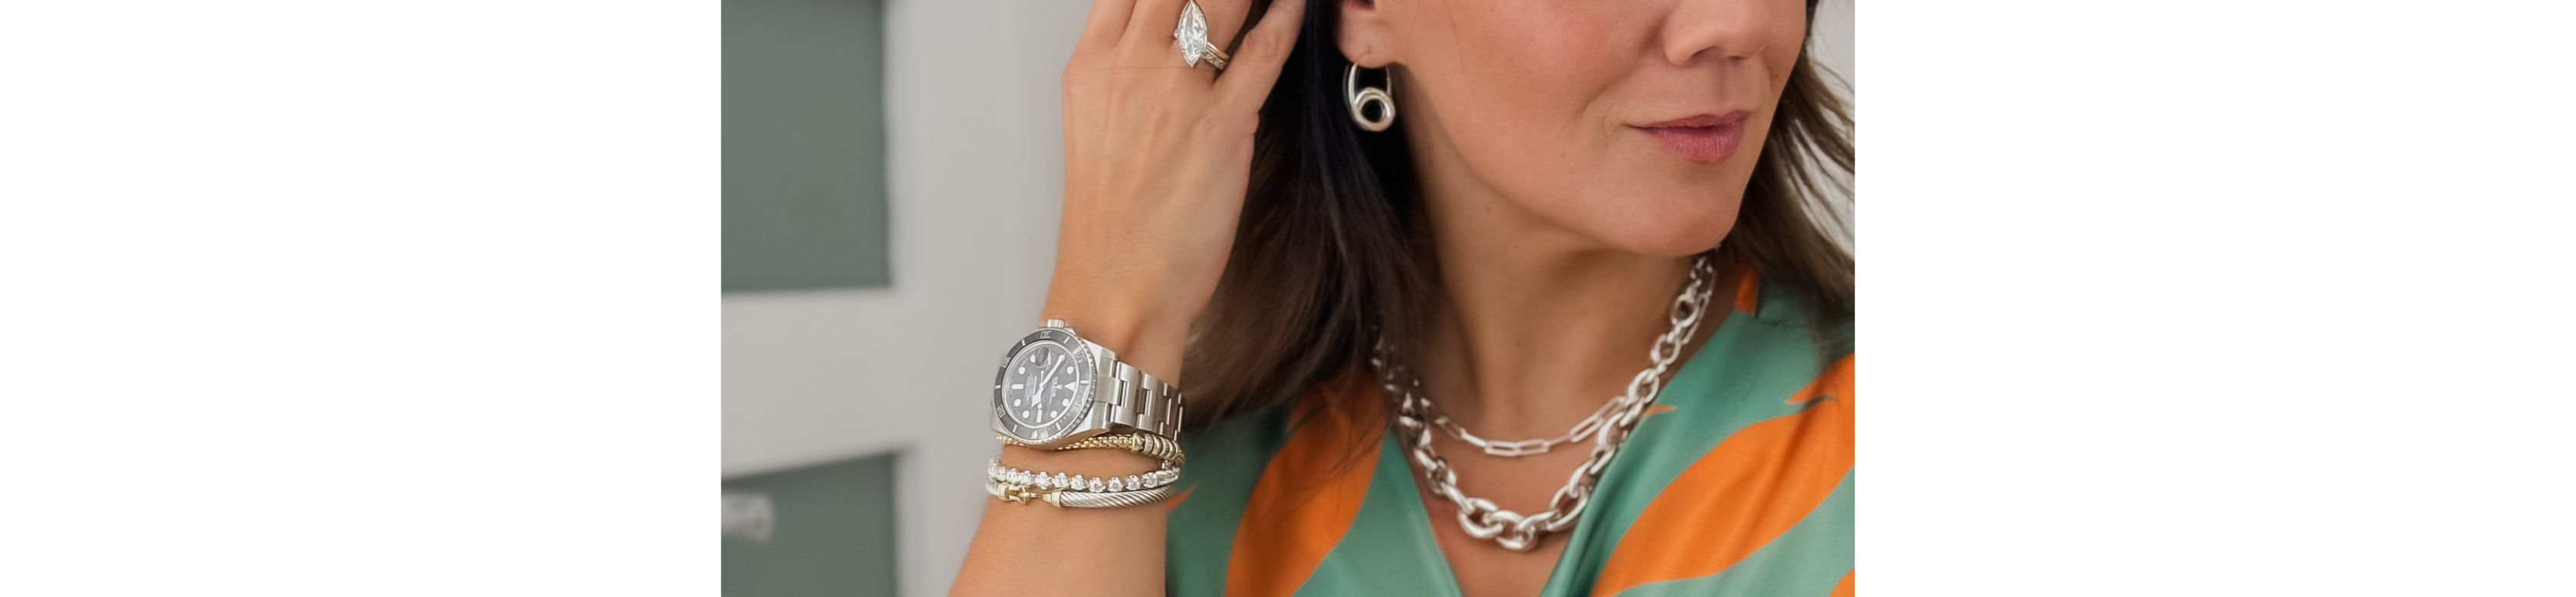 Jewelry Trend Alert: Silver for Spring